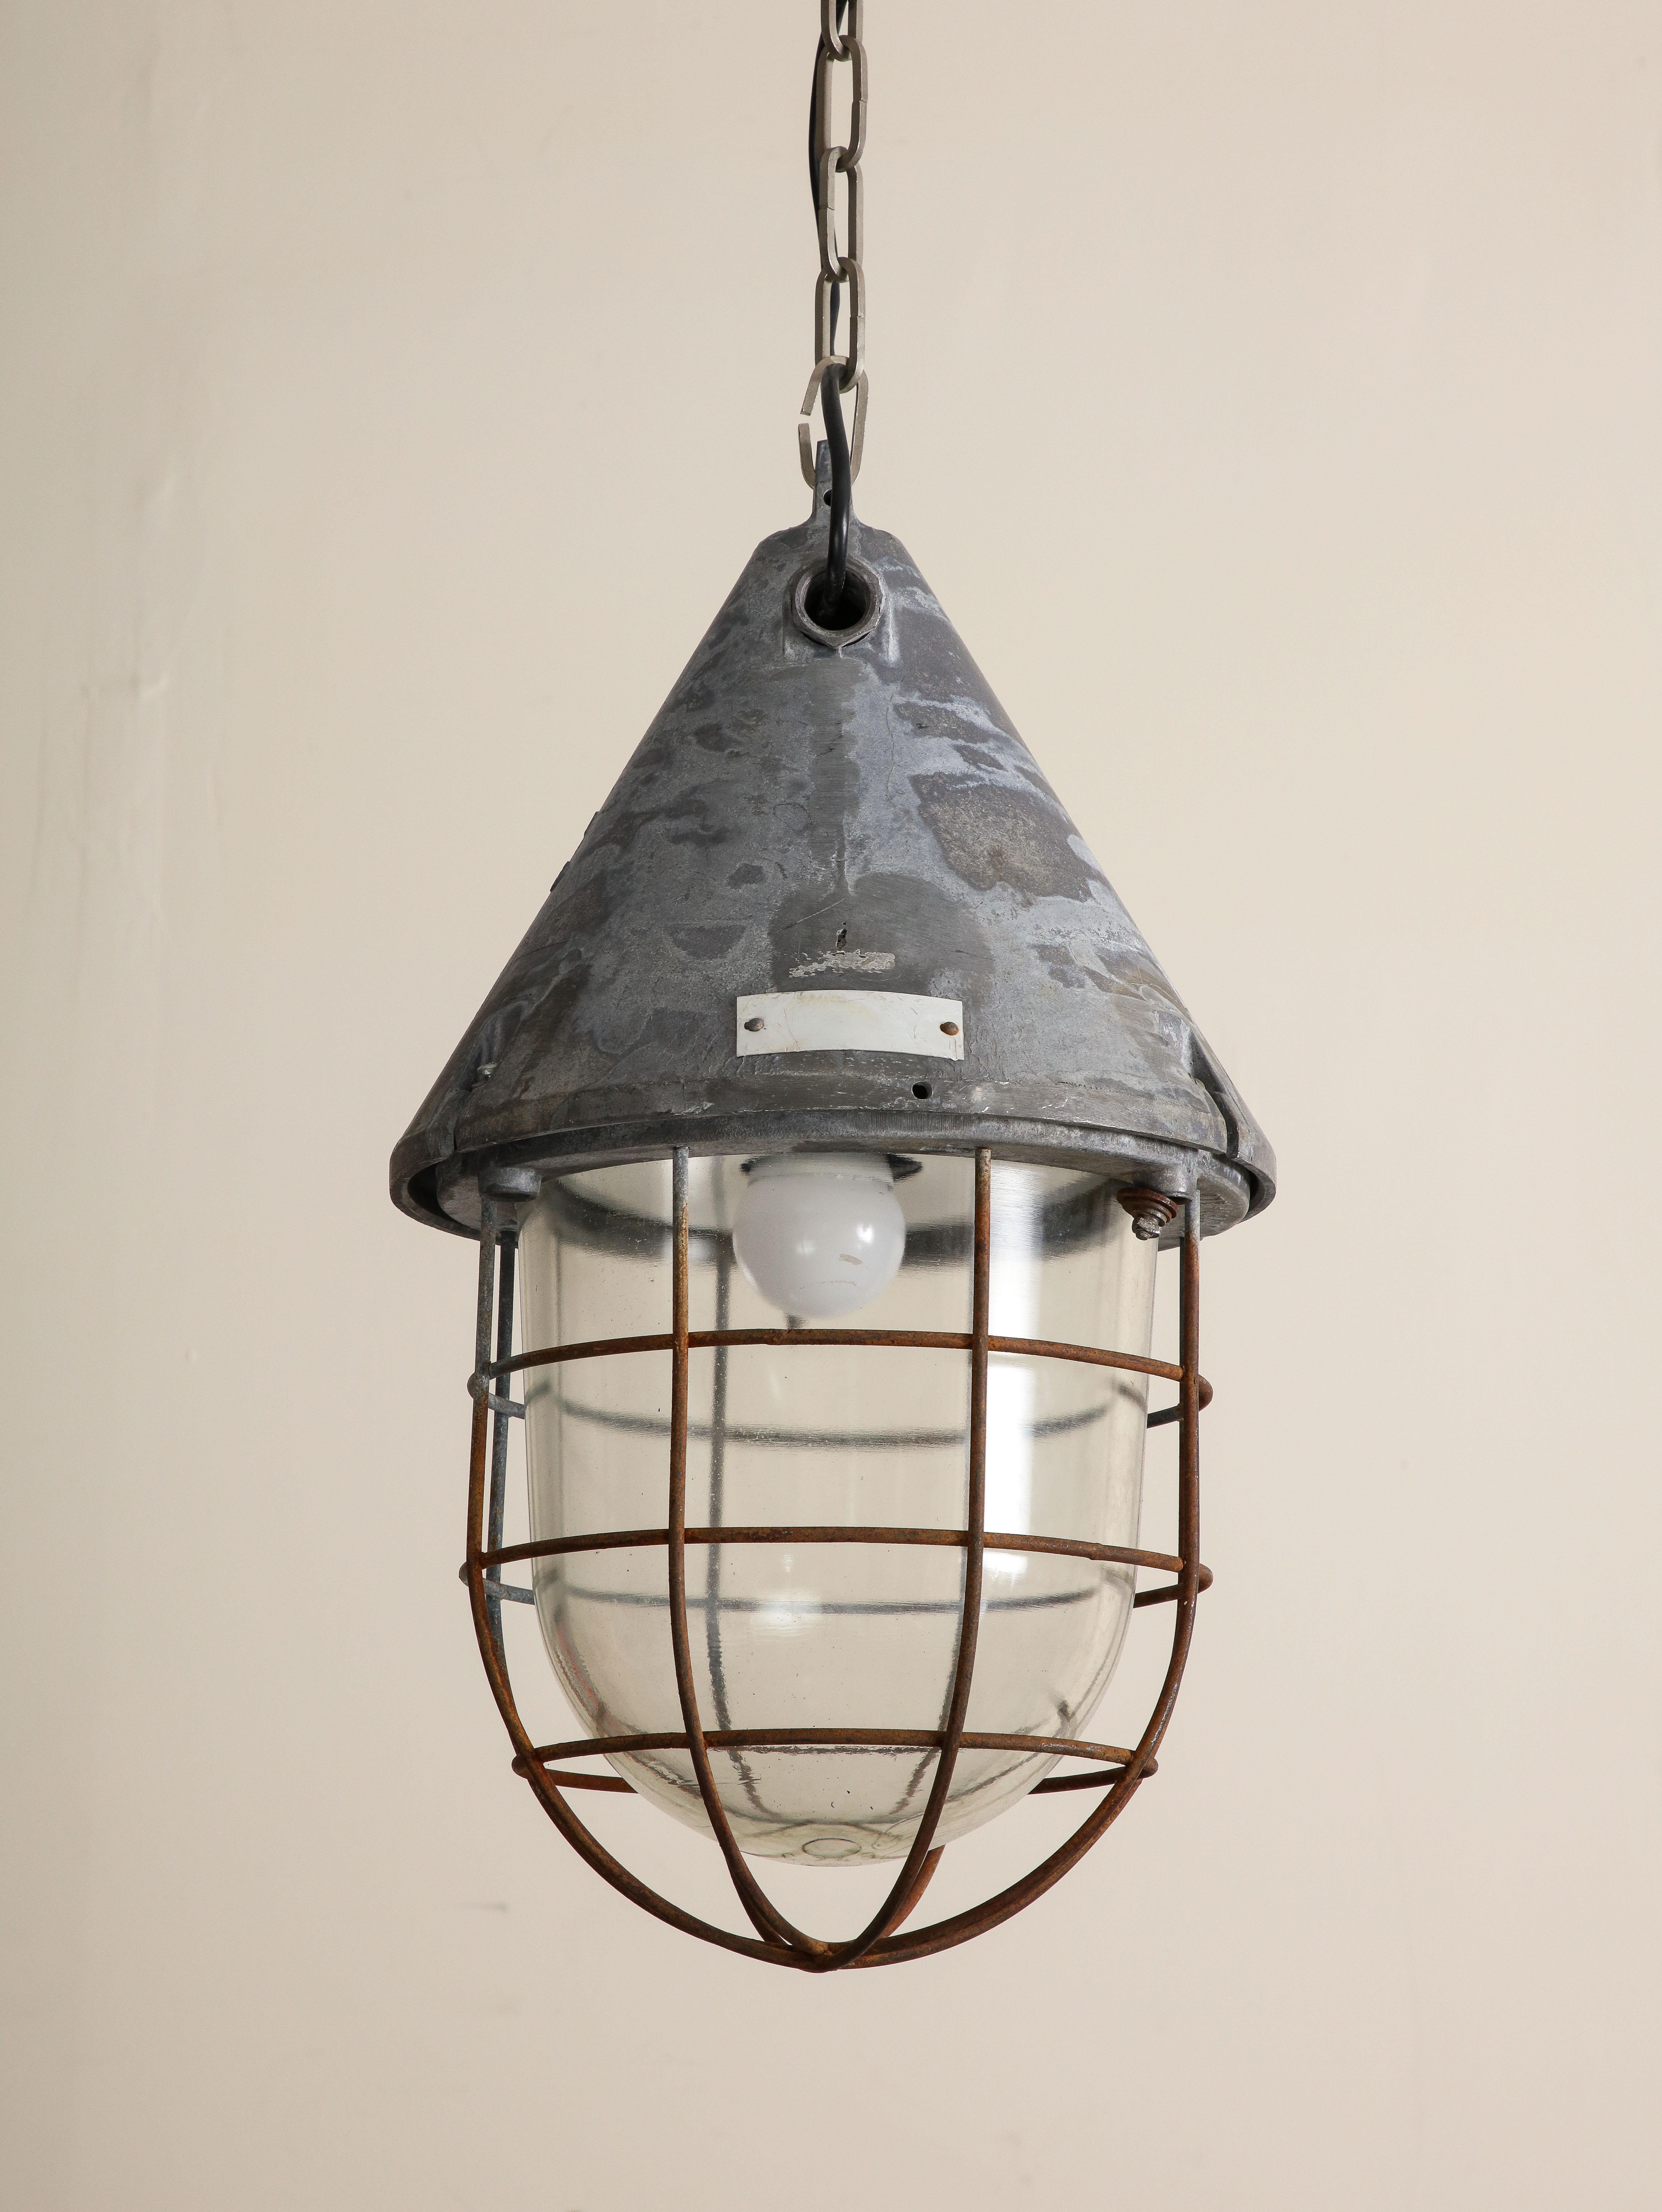 Pair of vintage industrial cast iron cage pendant lights, c. 1920. The cage is over clear glass cover. Conical cast iron tops have beautiful patina. Wired for USA, working condition.

12